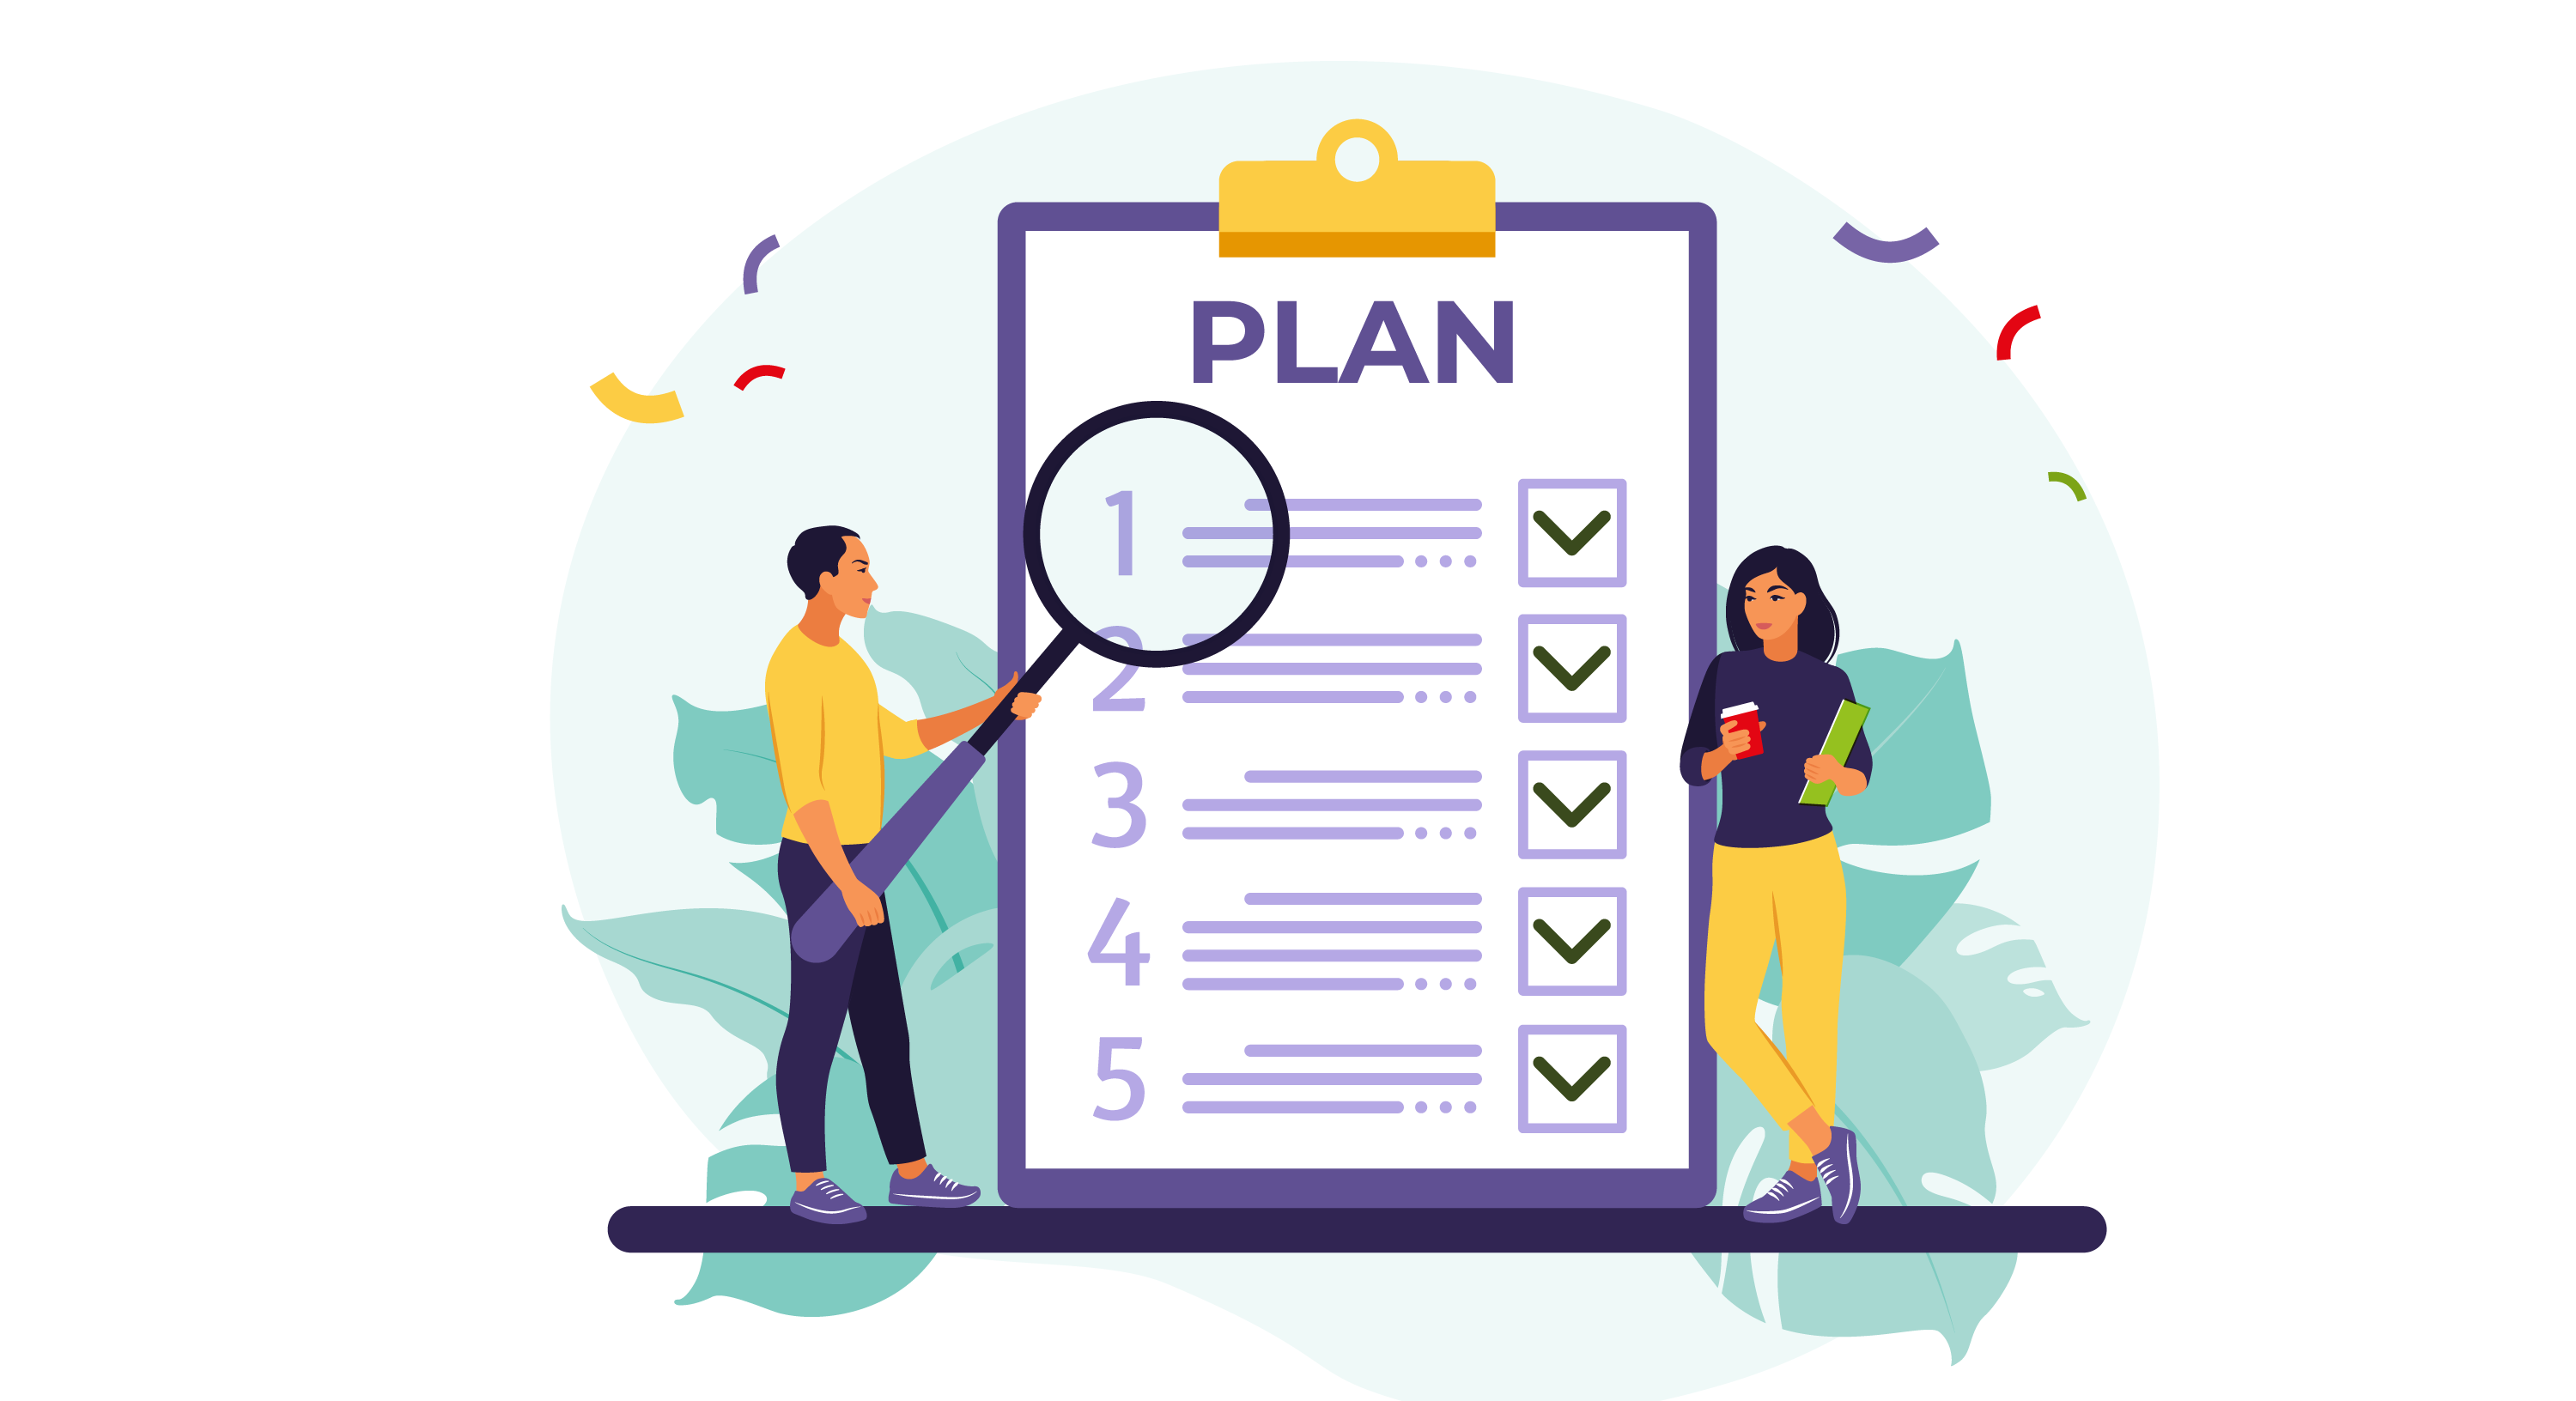 Examining a plan with a five step checklist